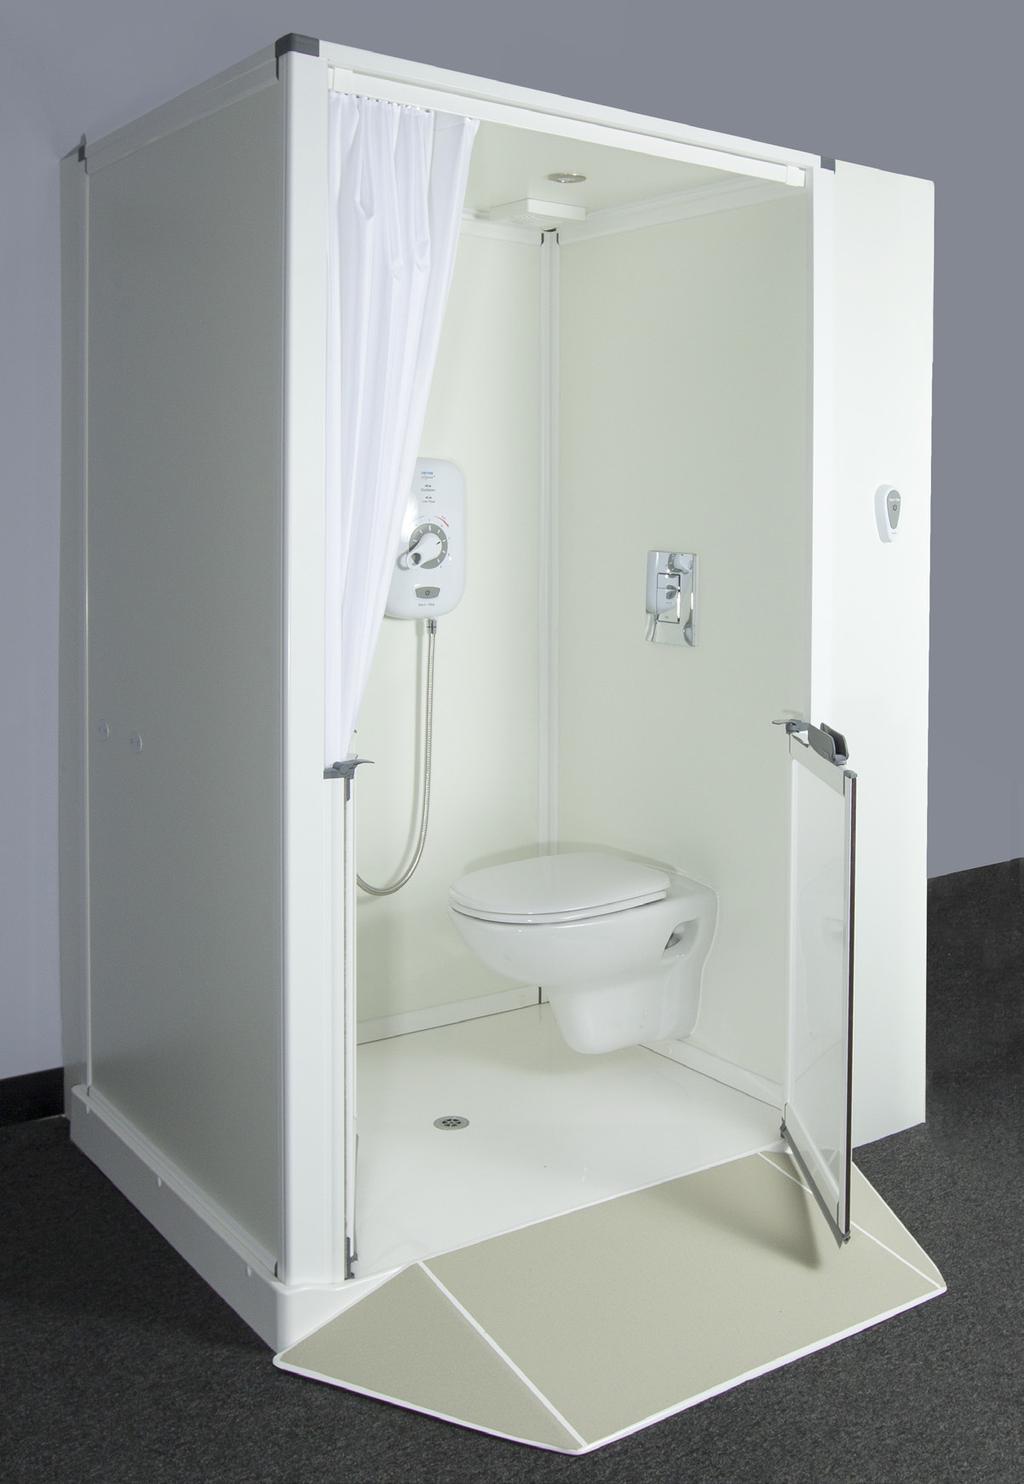 Tru Shower Toilet Cubicle Adapted bathroom specialists Autumn UK s shower toilet cubicles provide complete showering and toileting facilities all-in-one.